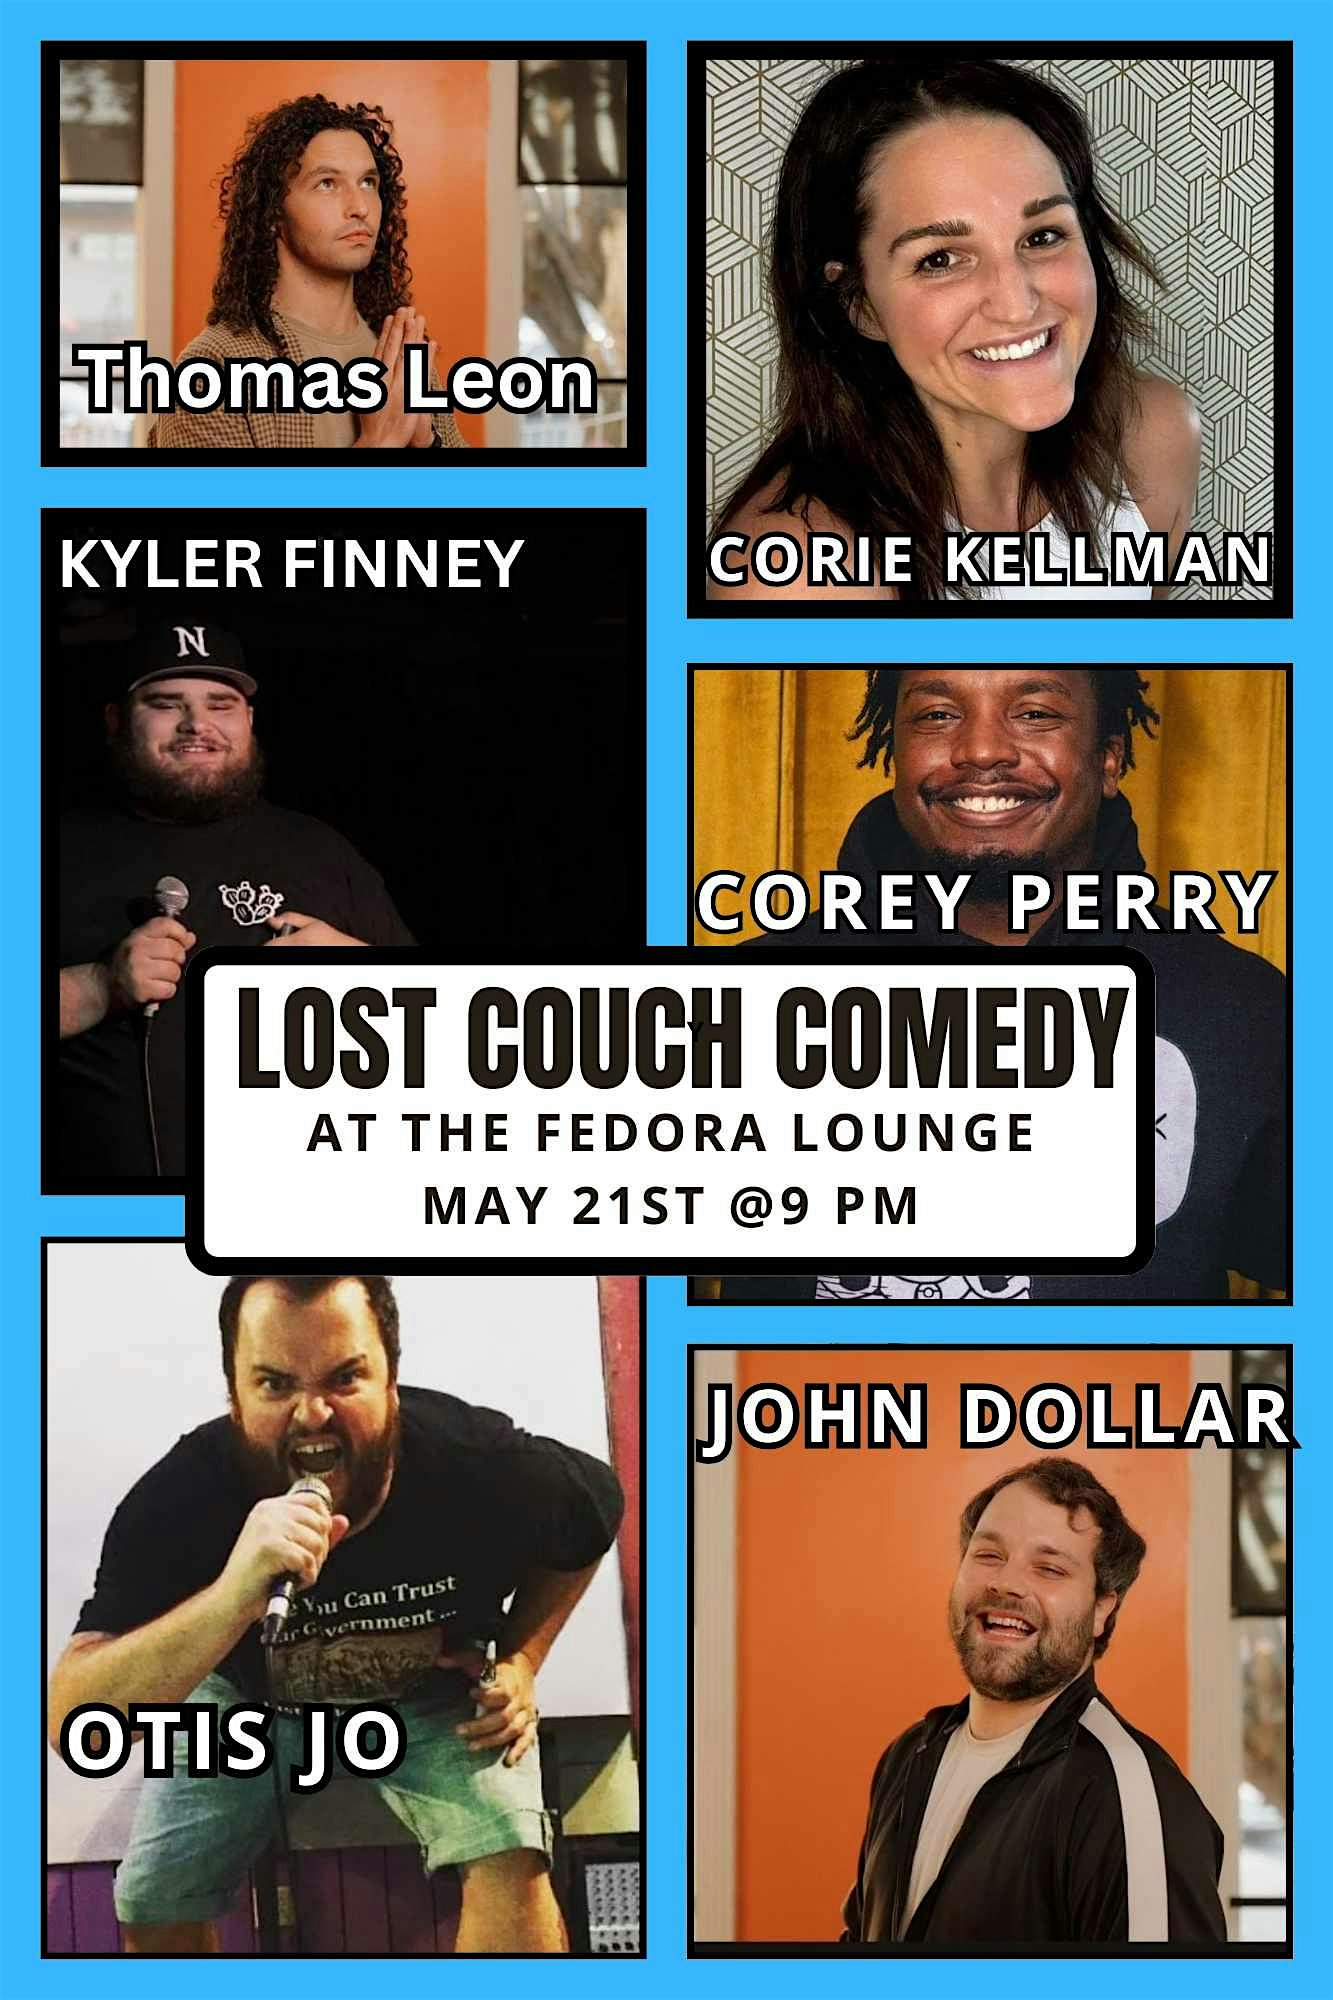 Lost Couch Comedy @ The Fedora Lounge